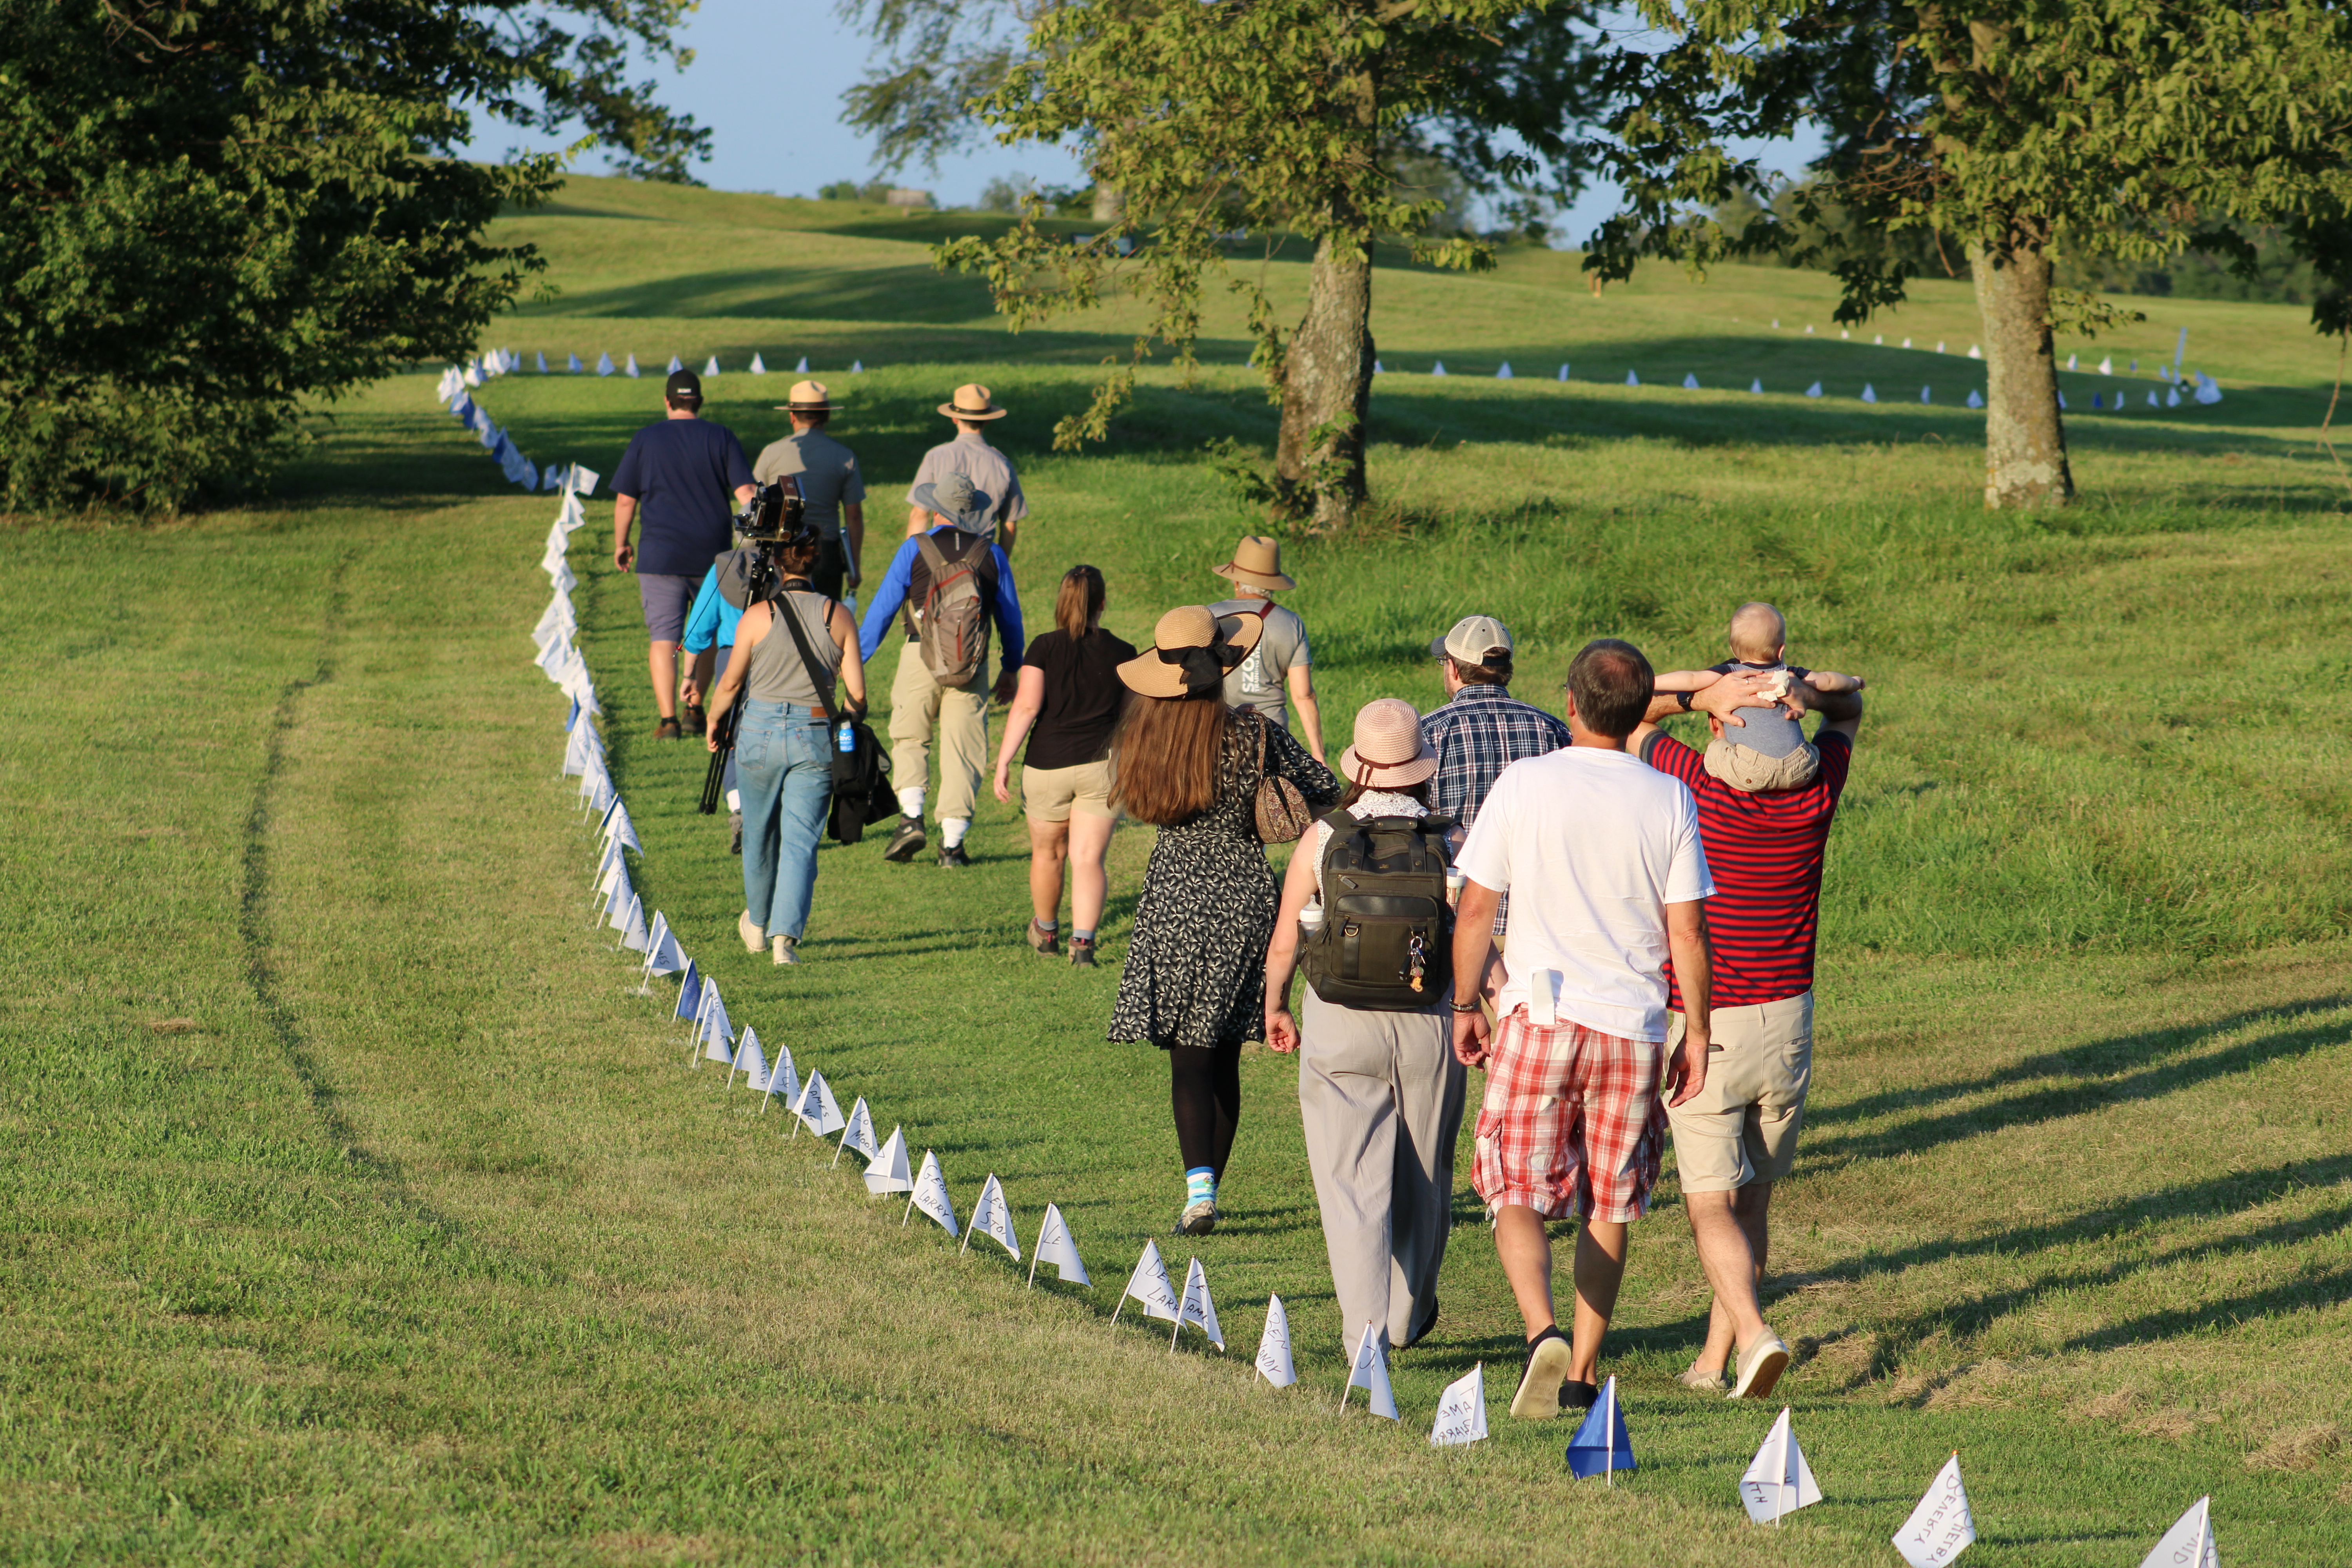 Group of people follow two park rangers along a trail lined by small white and blue flags.